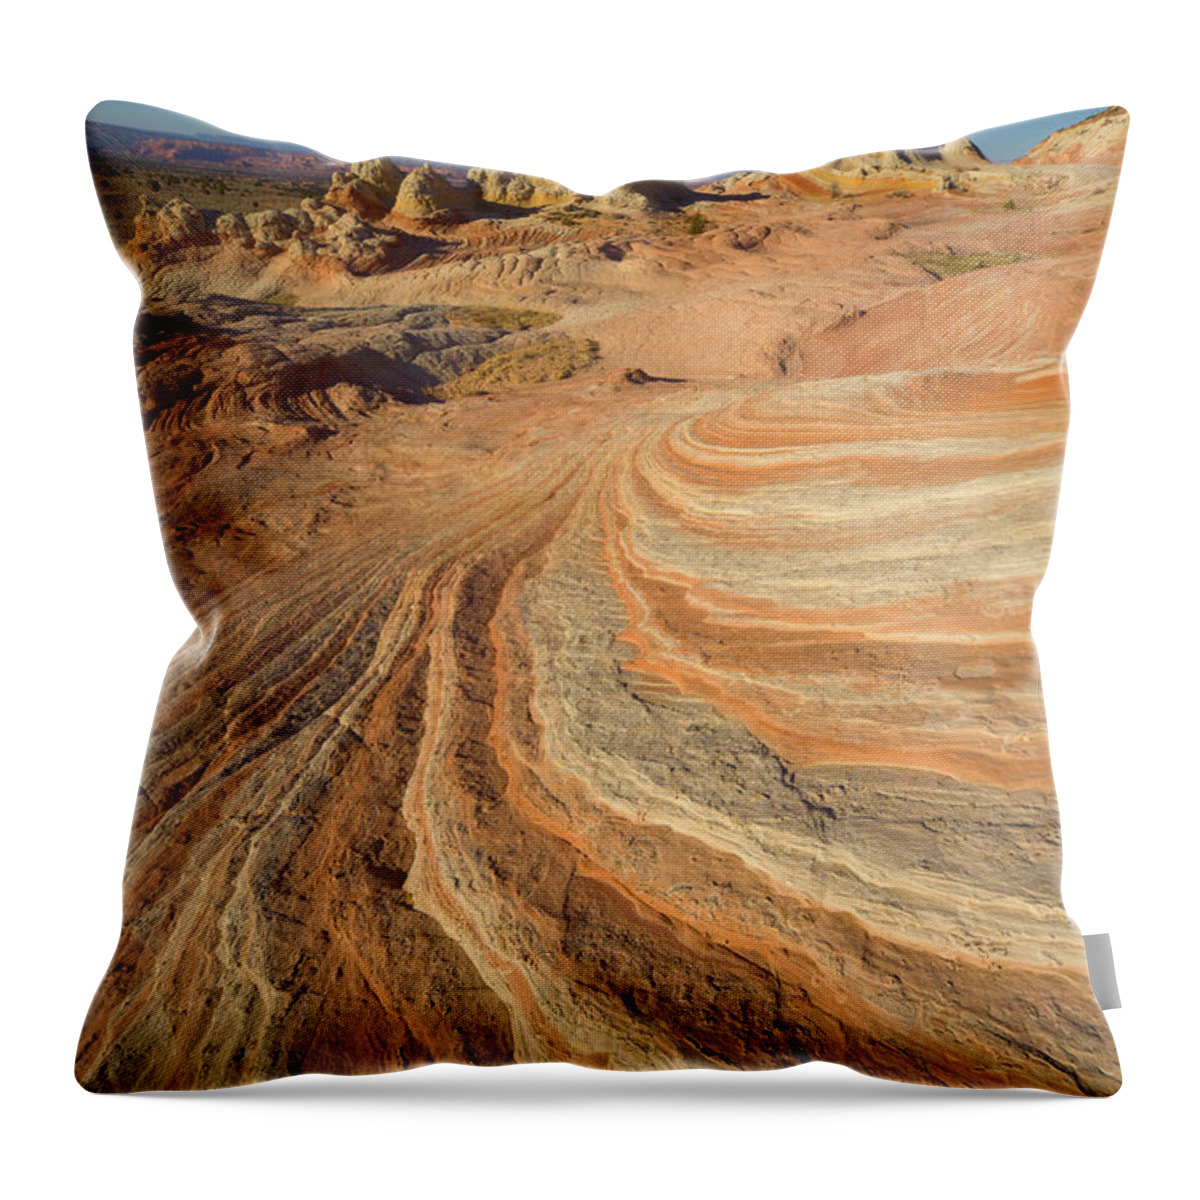 00431251 Throw Pillow featuring the photograph Sandstone Formations Coyote Buttes #2 by Yva Momatiuk John Eastcott